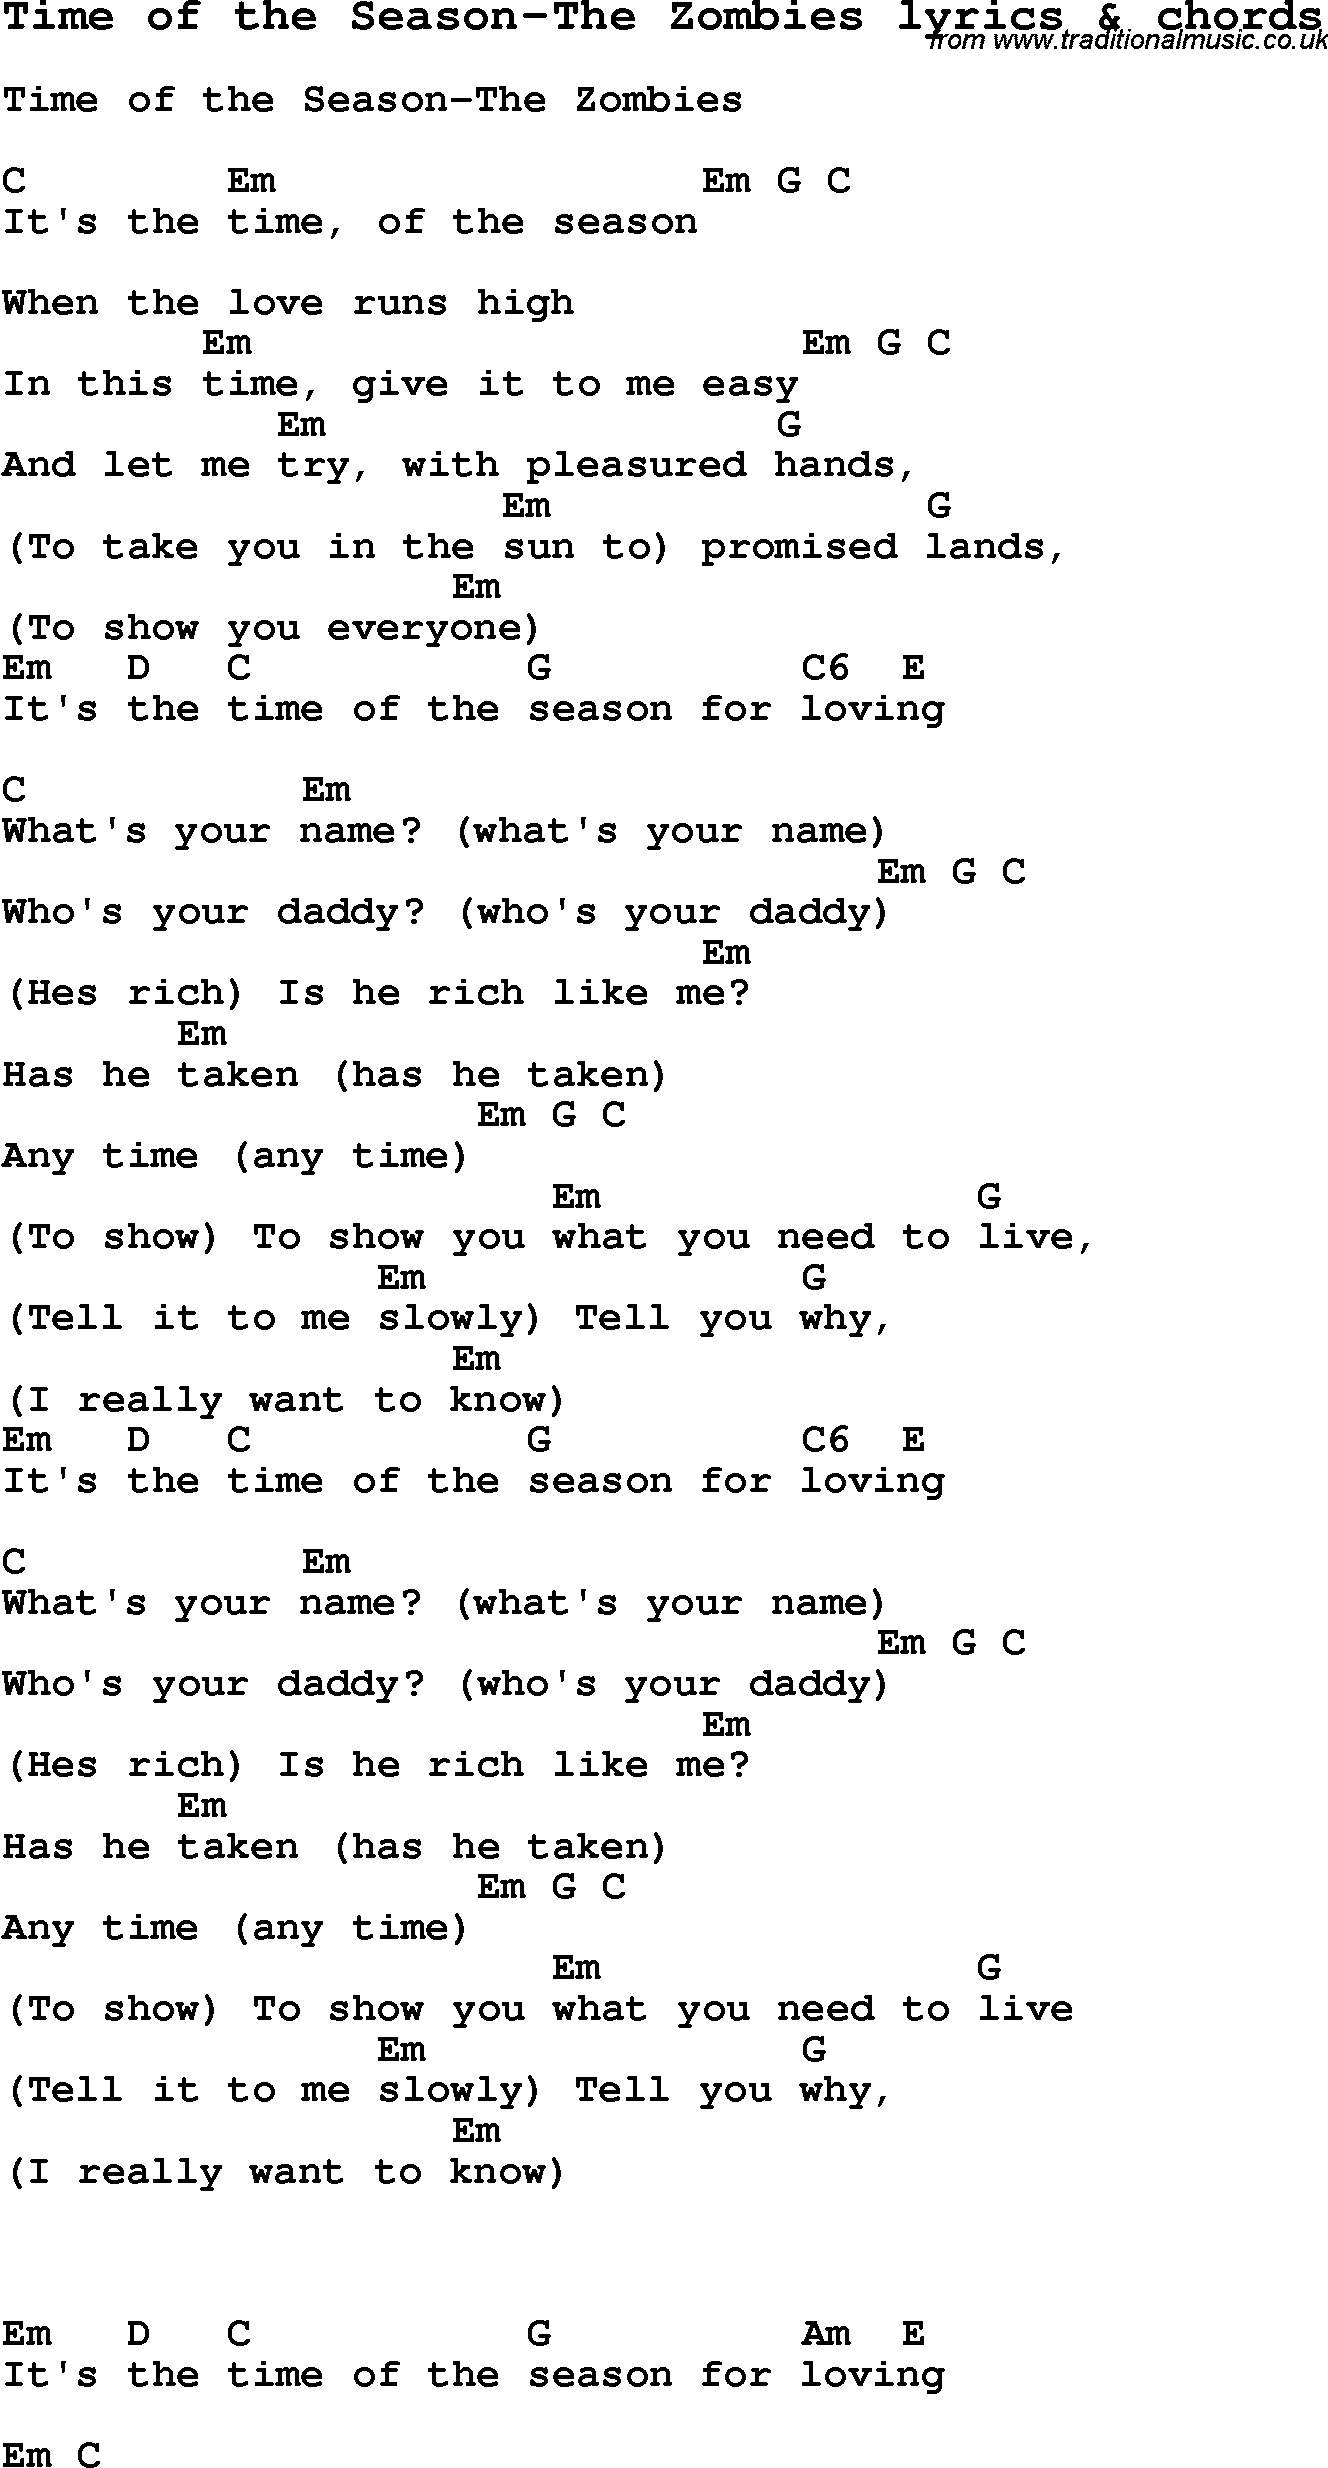 Love Song Lyrics for: Time of the Season-The Zombies with chords for Ukulele, Guitar Banjo etc.